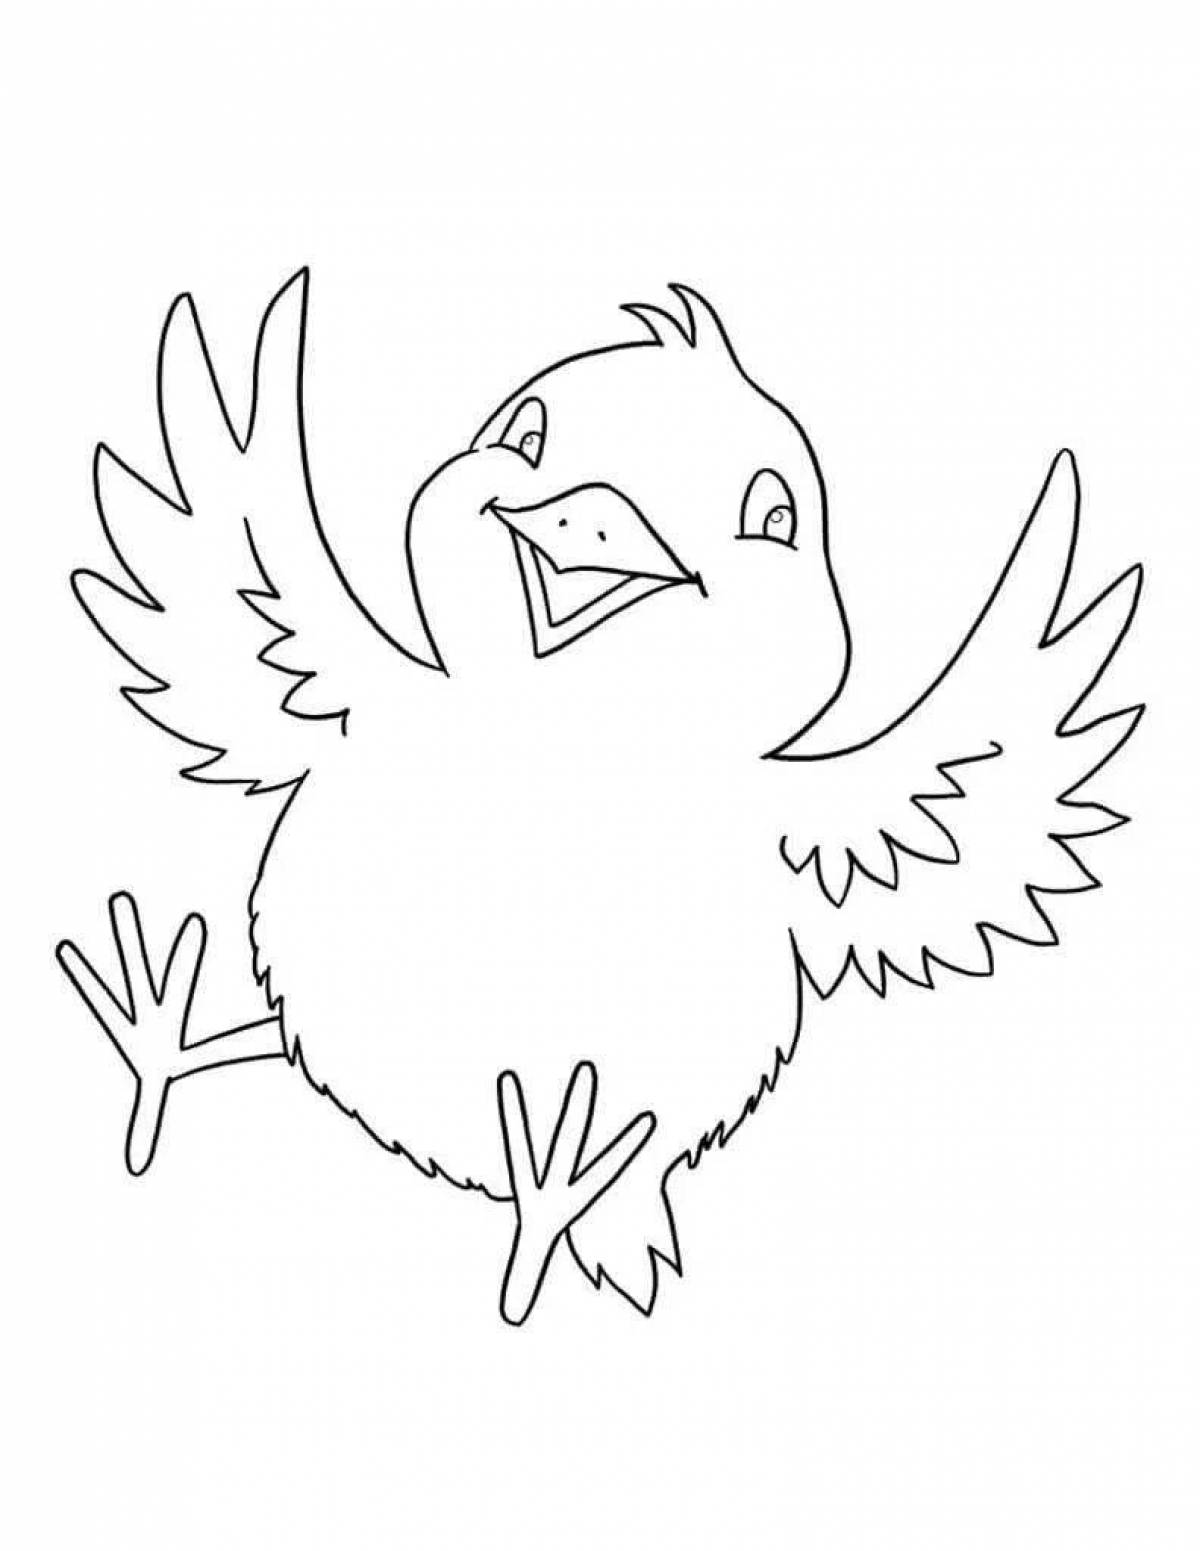 Glorious bird coloring page for juniors